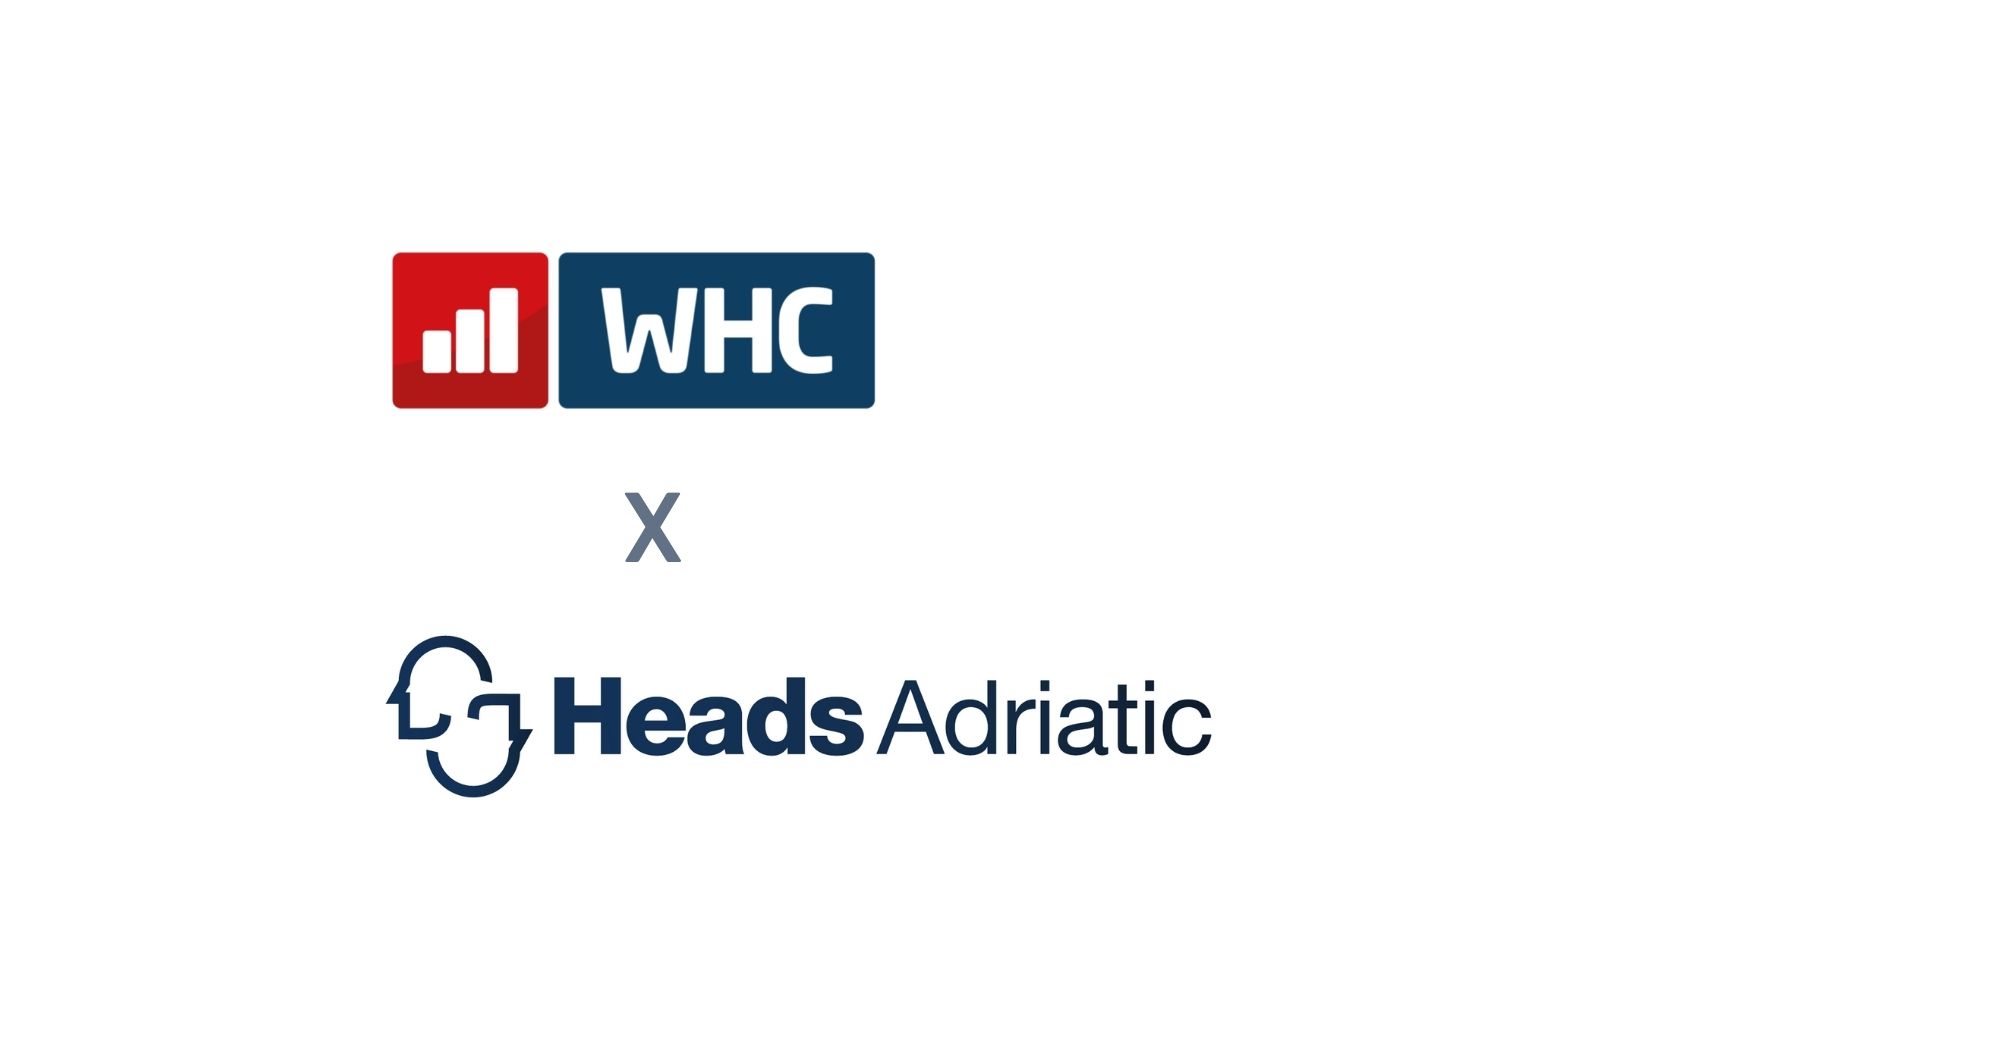 Huge milestone in the life of WHC: the company has acquired a majority stake in one of the leading HR service providers of the Adriatic region